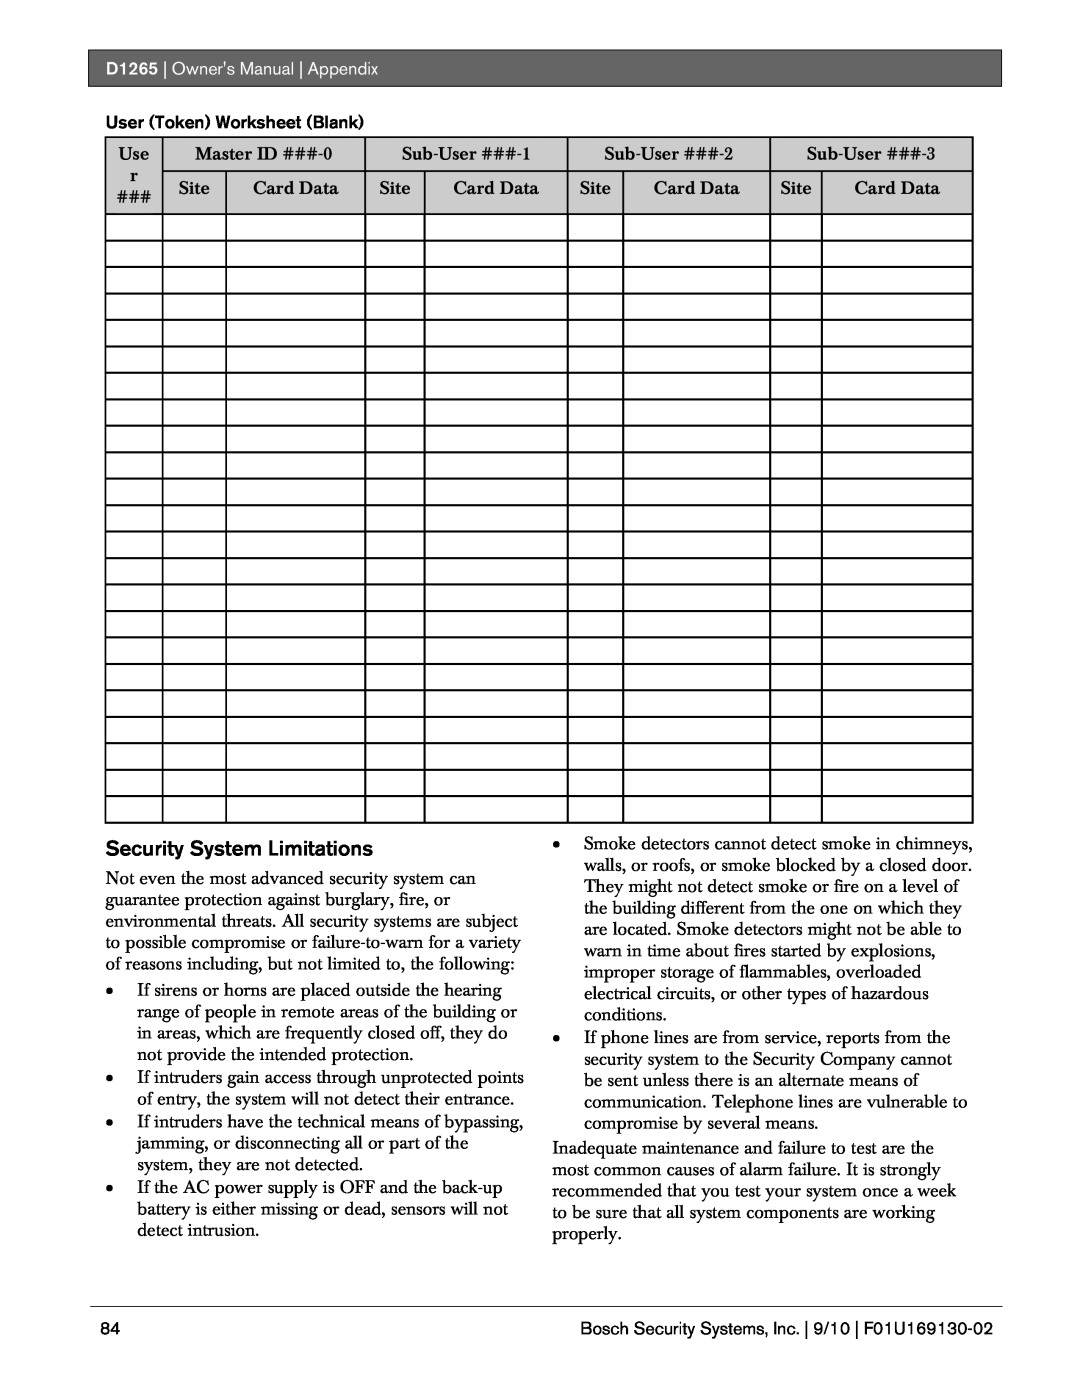 Bosch Appliances owner manual Security System Limitations, D1265 | Owners Manual | Appendix, User Token Worksheet Blank 